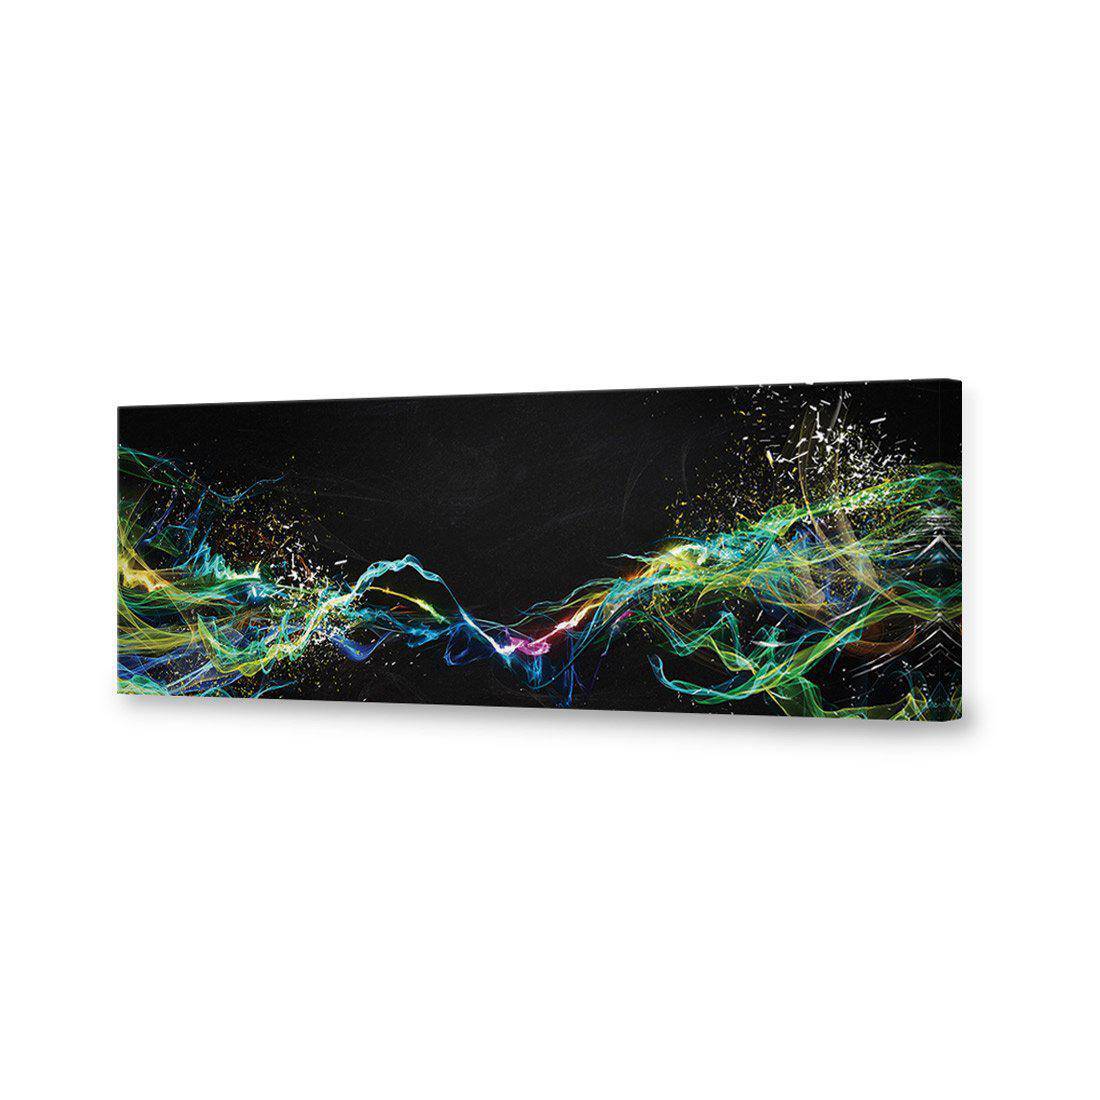 Electricity On Black Canvas Art-Canvas-Wall Art Designs-60x20cm-Canvas - No Frame-Wall Art Designs